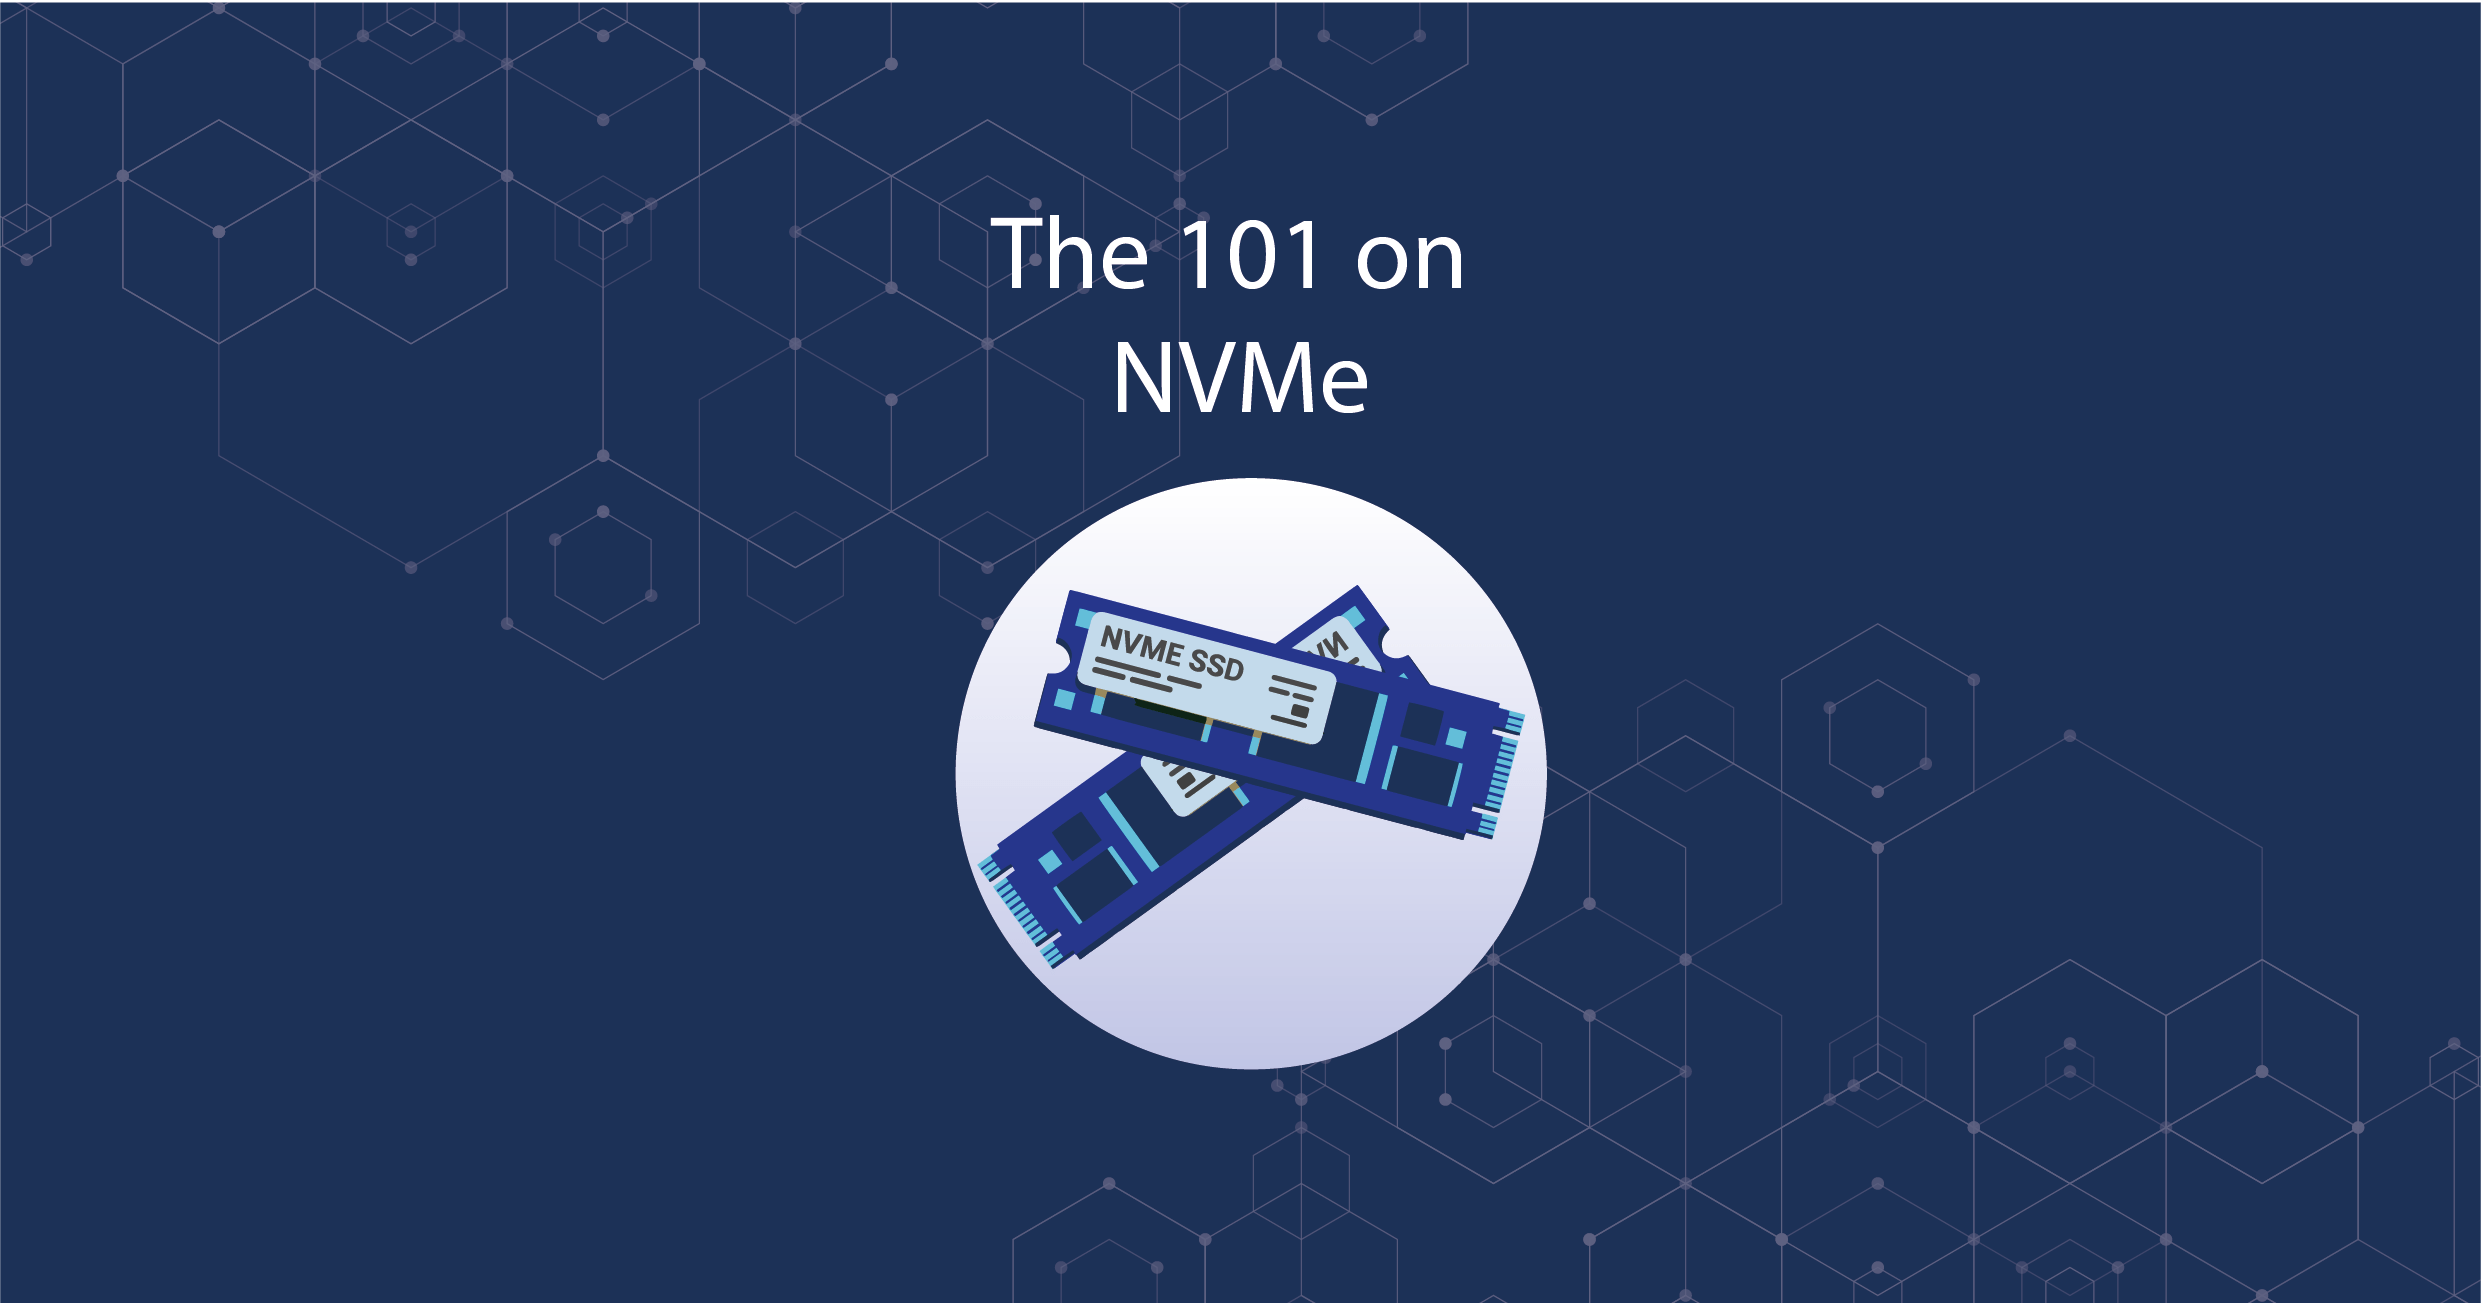 The 101 on NVMe